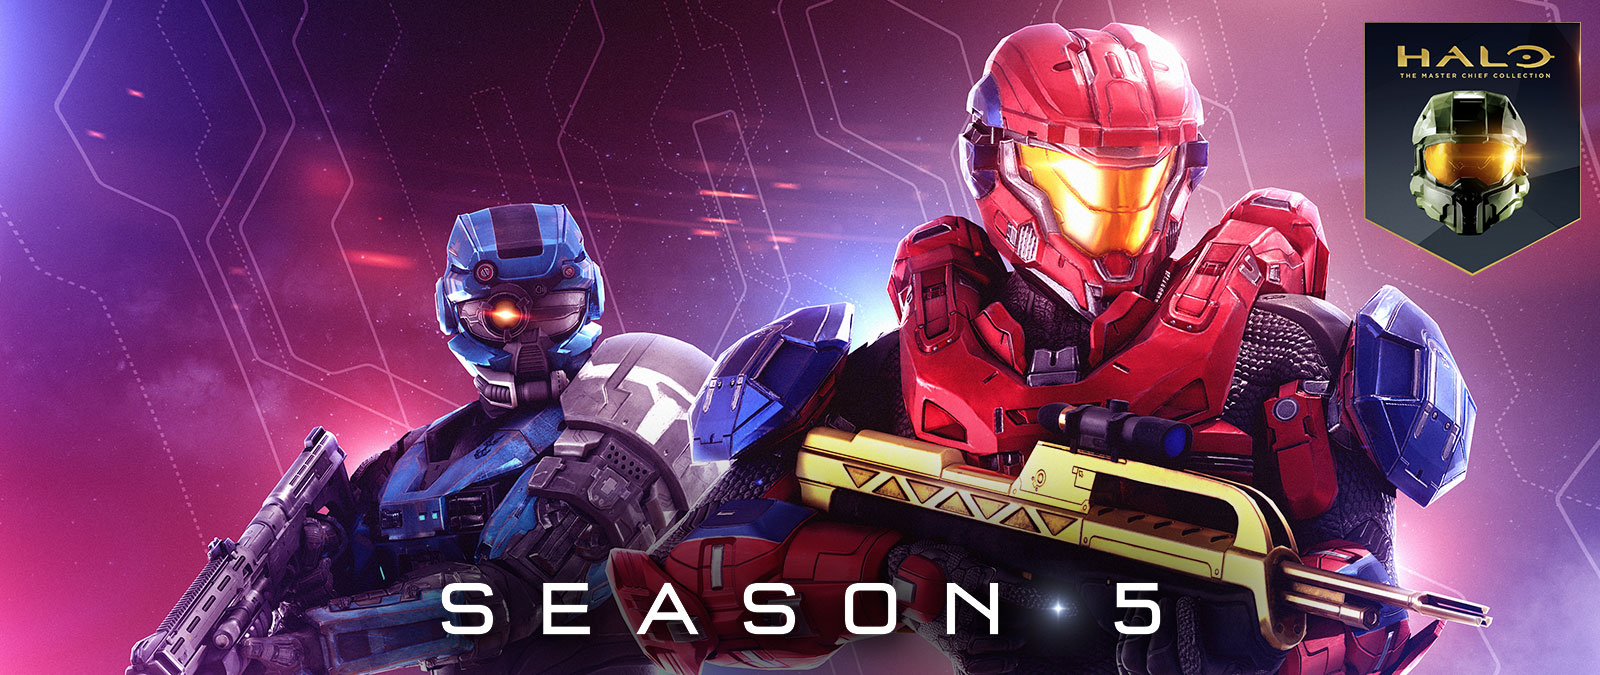 Halo: The Master Chief Collection, Season 5, A red Spartan holds a gold battle rifle while a blue Spartan wears a special helmet with one eye